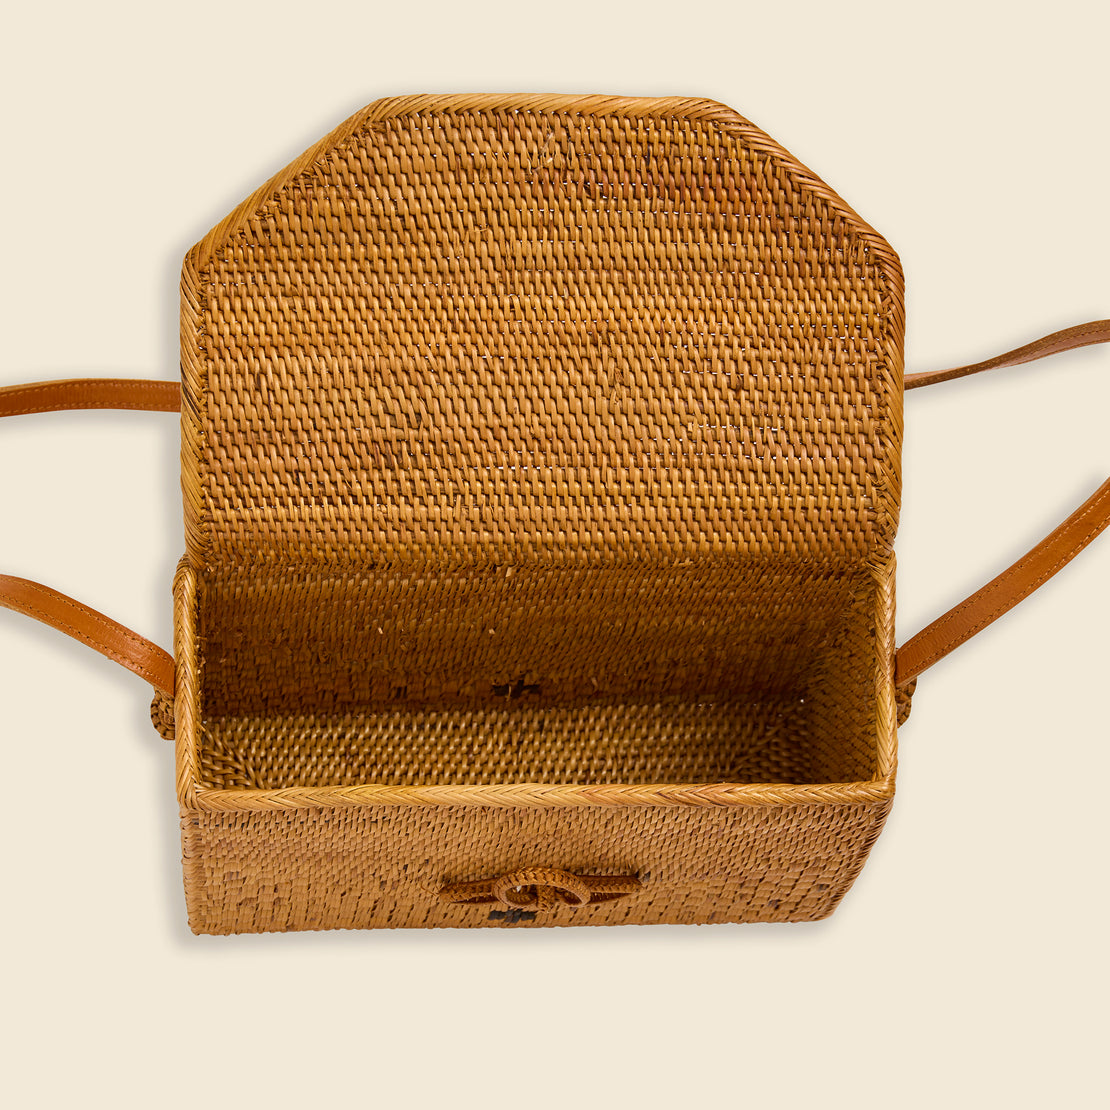 Sofia Bag - Natural Rattan - Bembien - STAG Provisions - W - Accessories - Bag